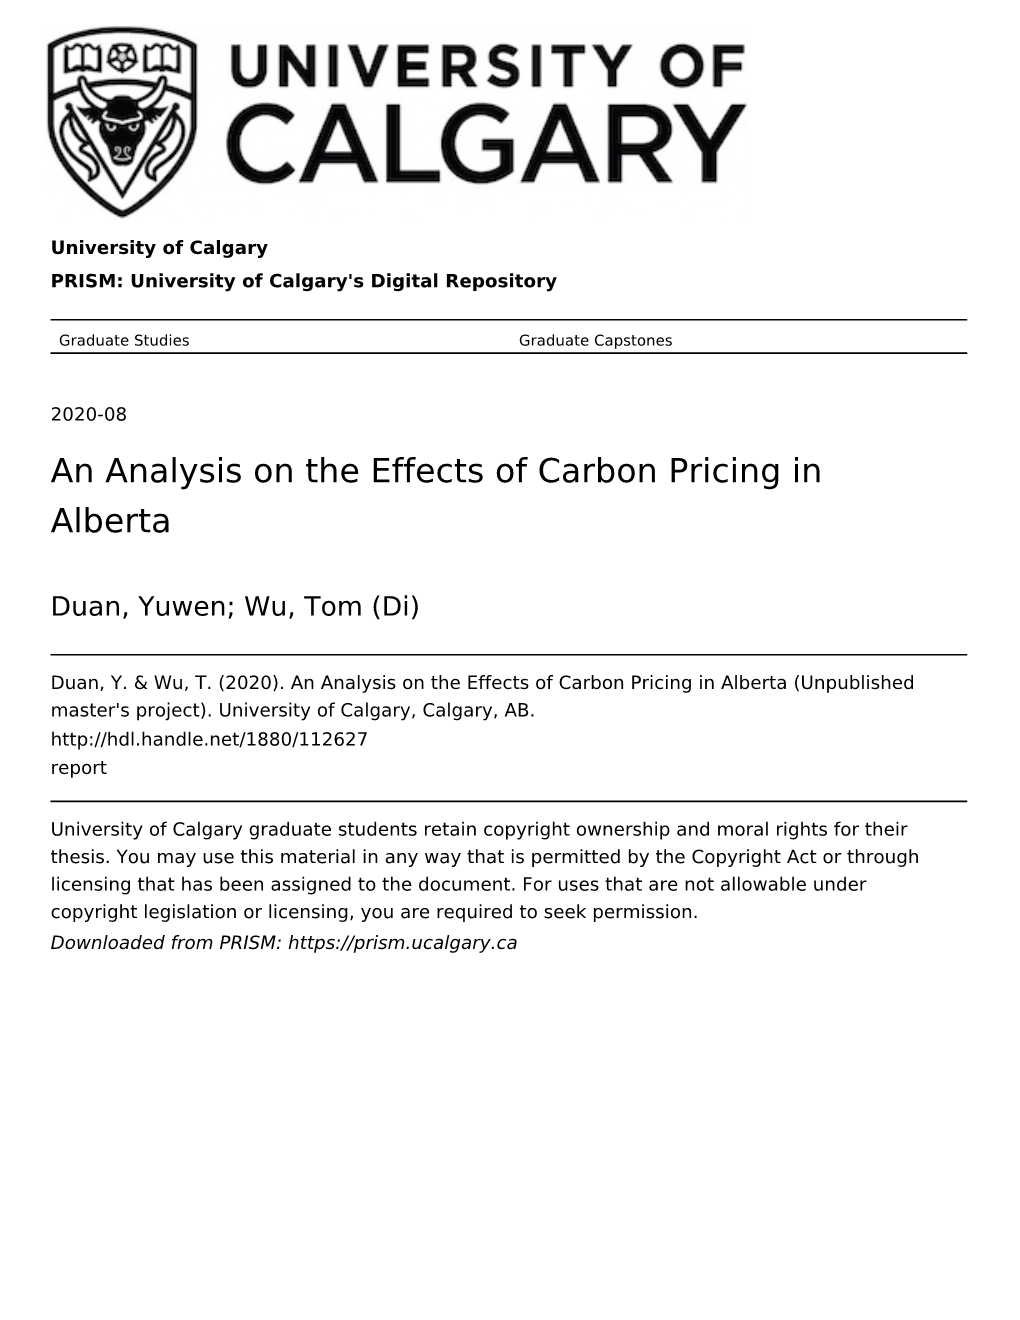 An Analysis on the Effects of Carbon Pricing in Alberta